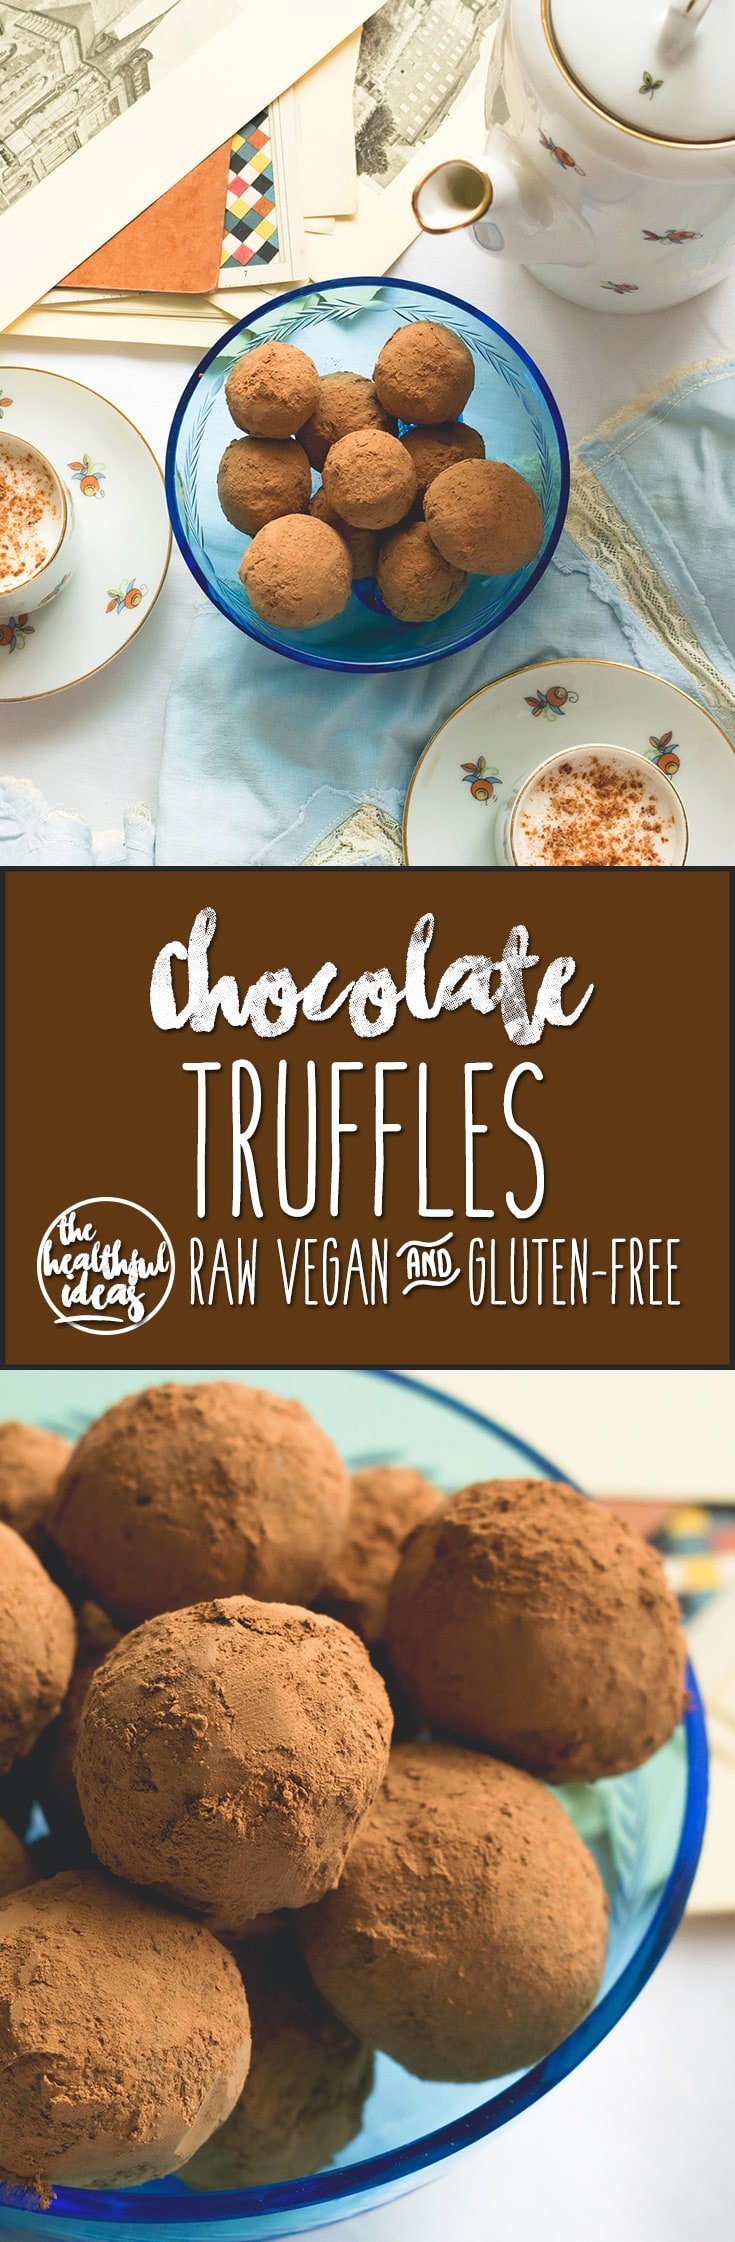 Chocolate Truffles - sweet and chocolatey, these truffles are the perfect dessert or snack when you're craving something sweet. Great way to use up leftover pulp from making coconut milk! | thehealthfulideas.com